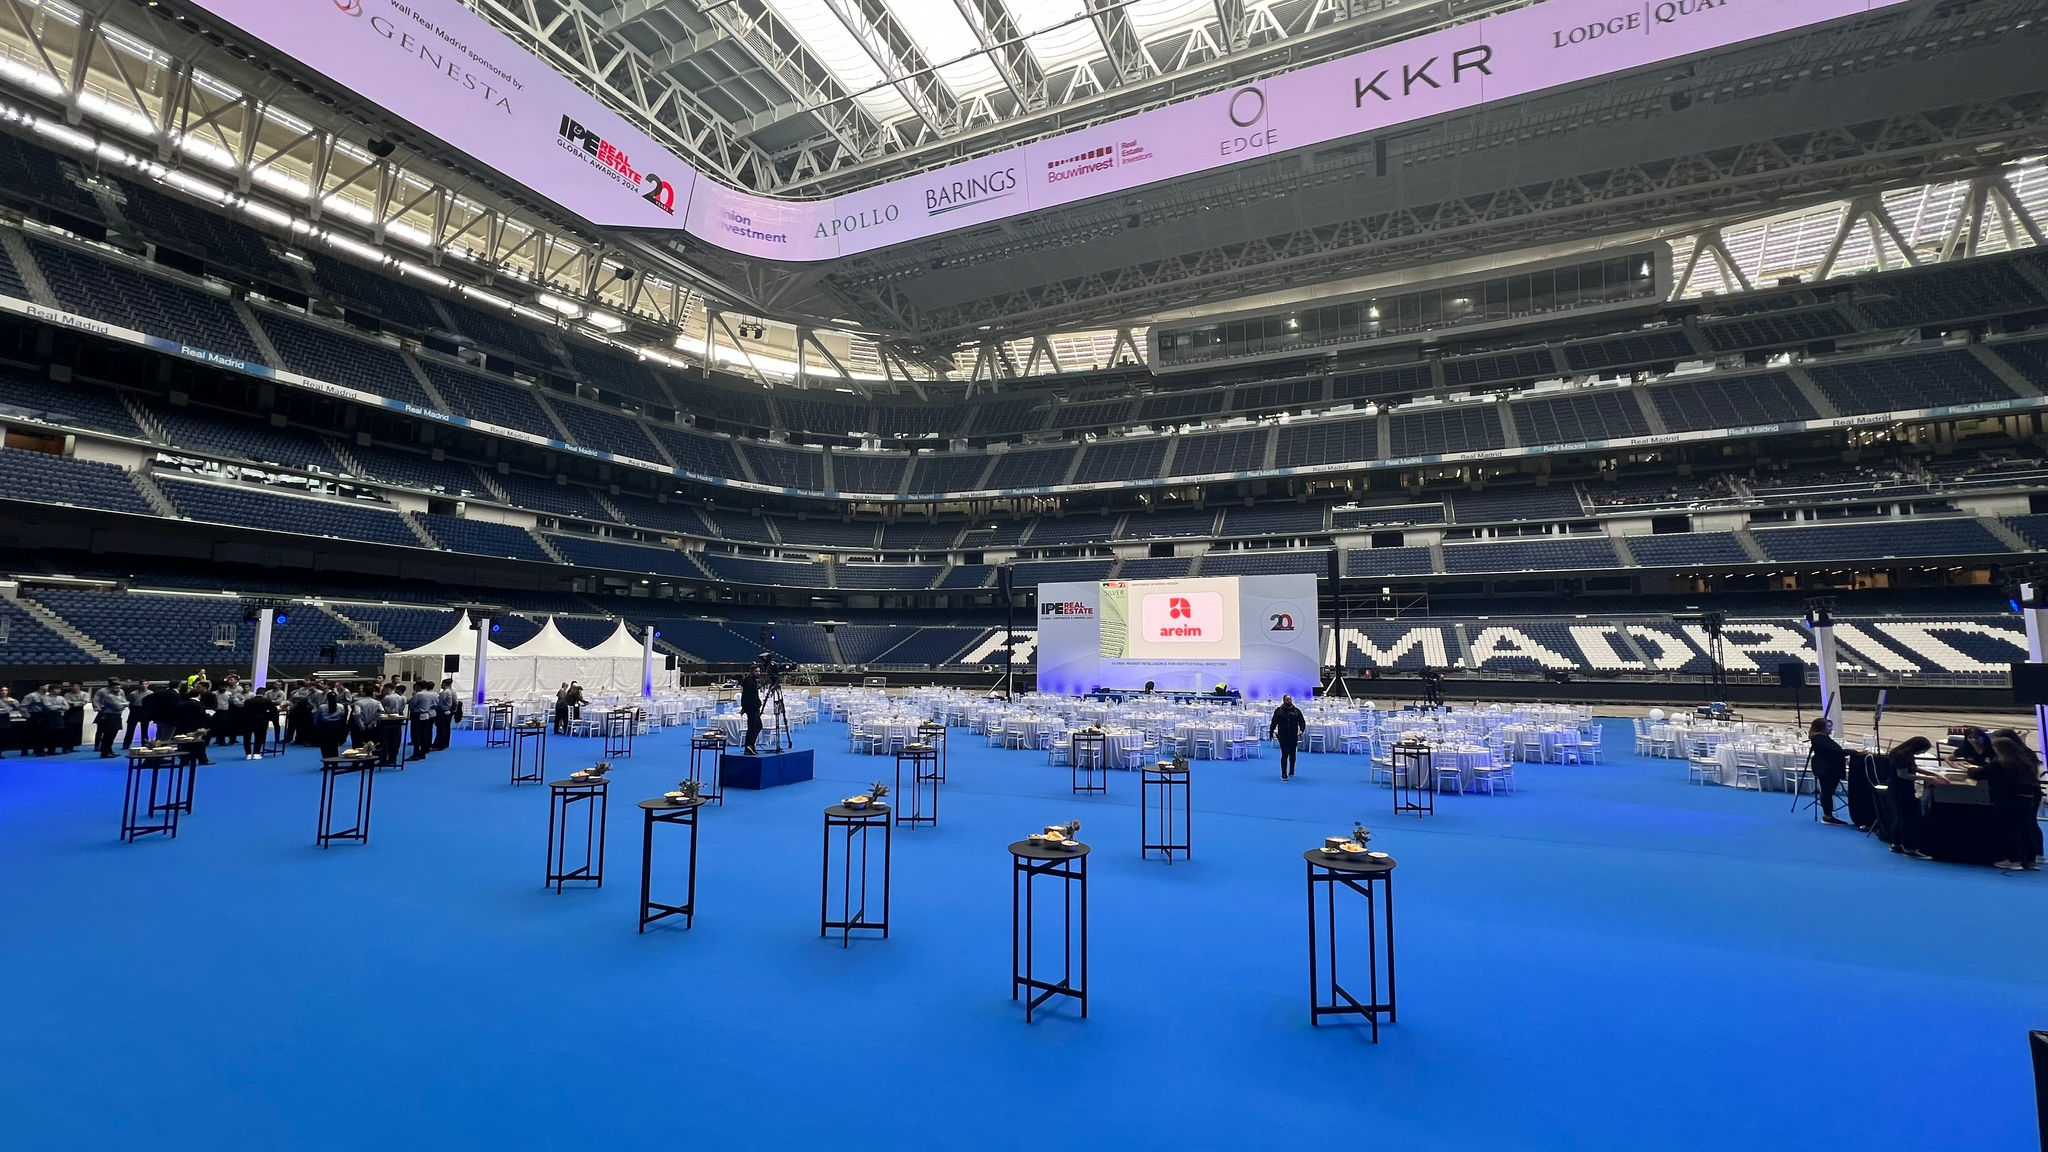 Event on the football pitch, blue floor, tables with chairs for an aperitive or dinner